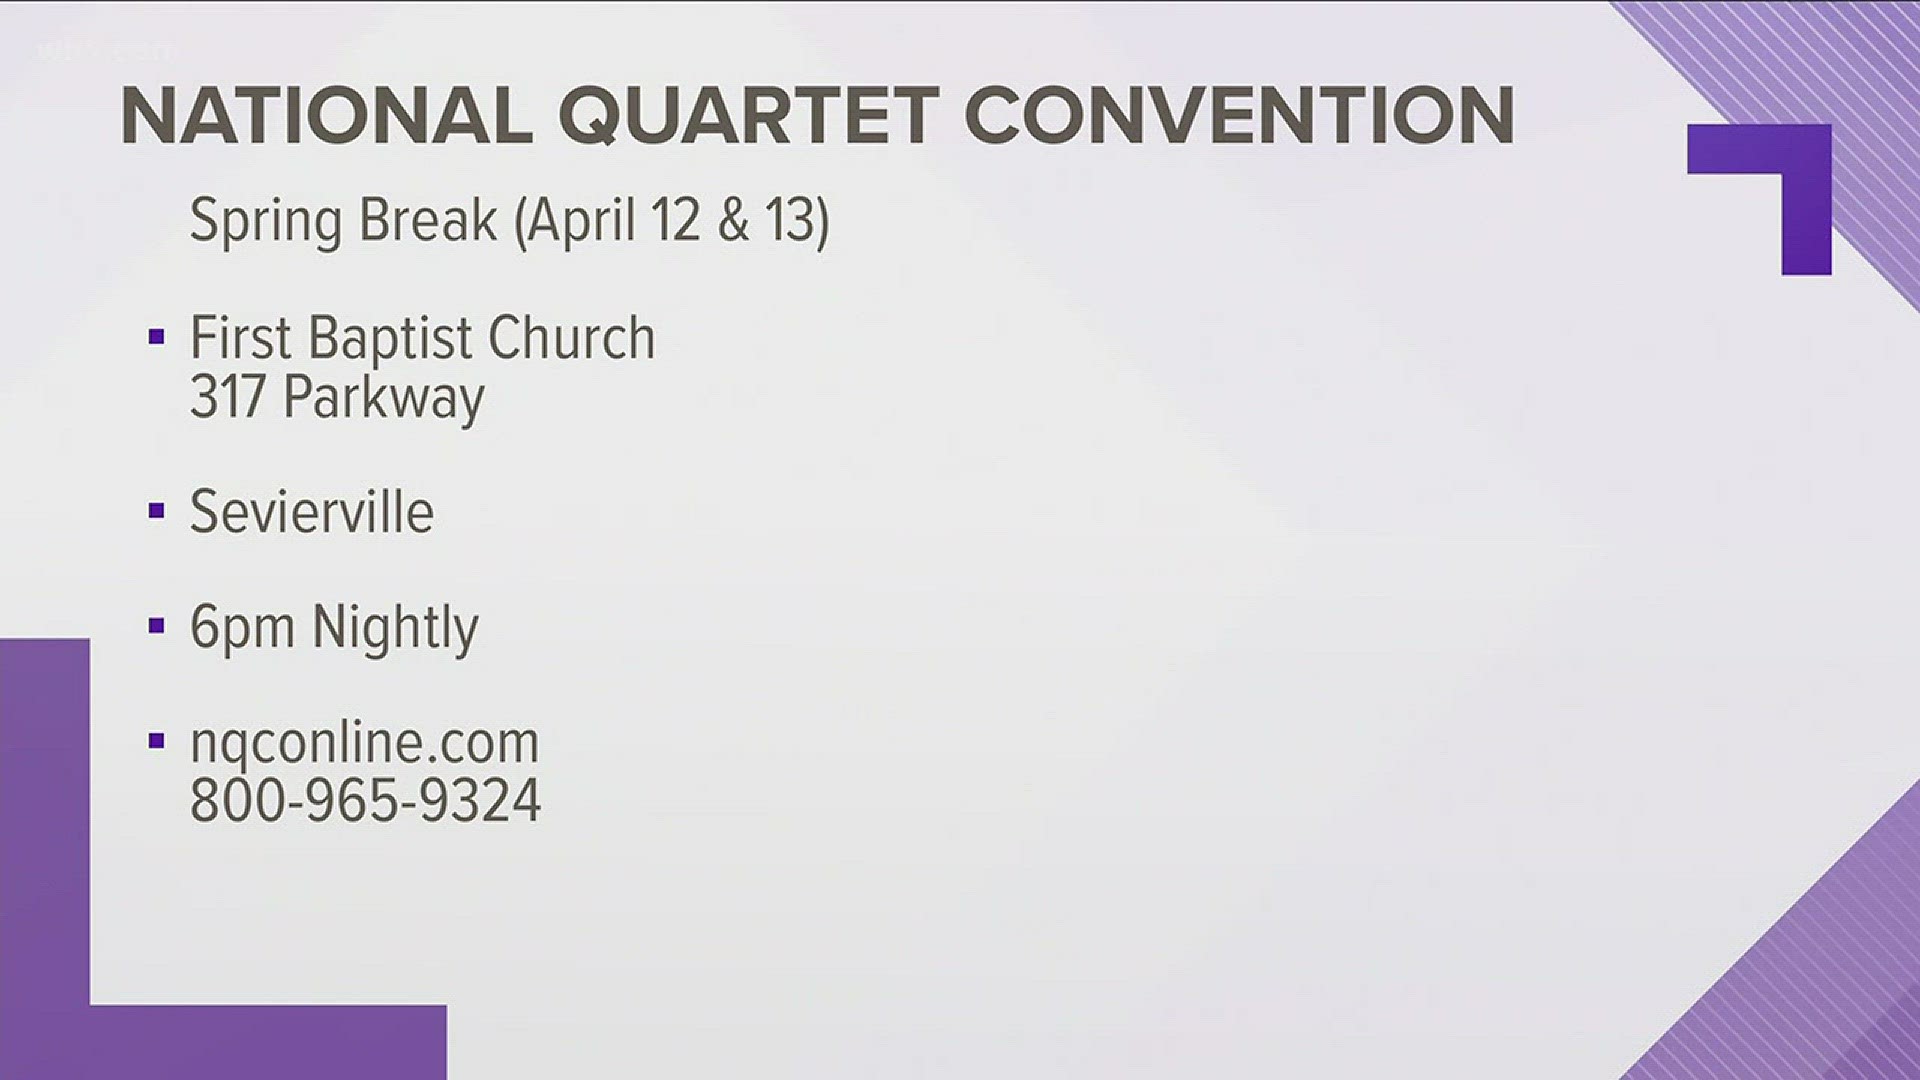 The National Quartet Convention will host a spring break event April 12 & 13 at 6pm nightly at the First Baptist Church in Sevierville. For tickets visit nqconline.com or call 800-965-9324.February 27, 2018, 4pm